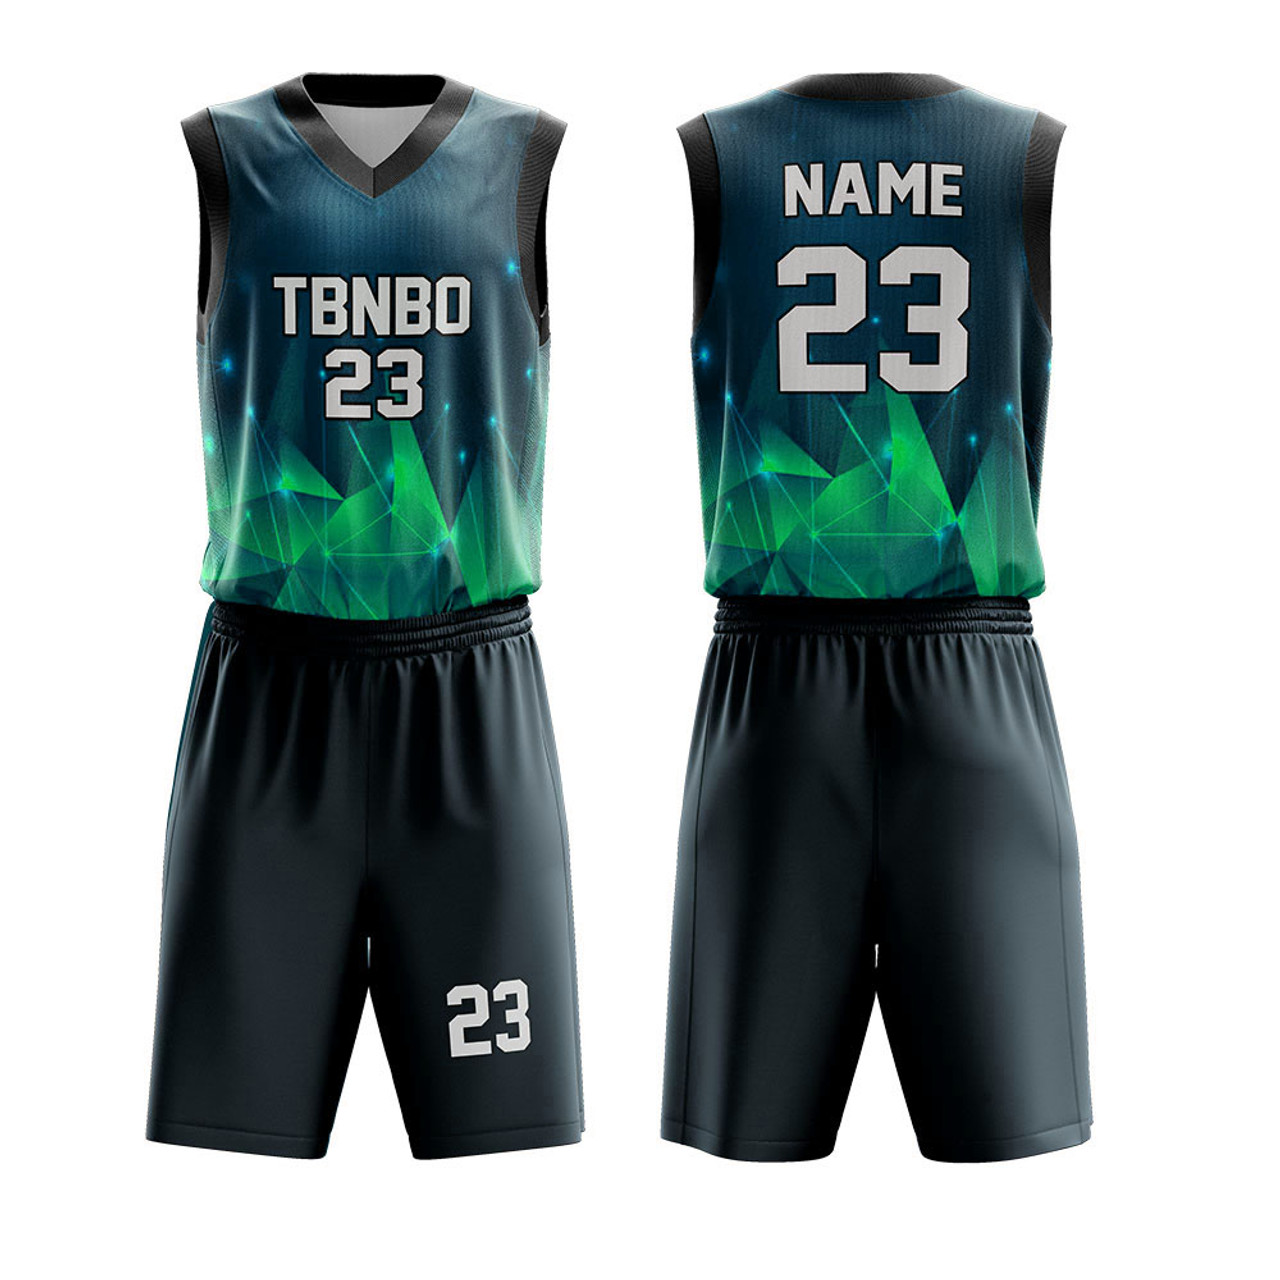 Personalize Diamond Pattern Design Sublimated Printed Team Basketball ...